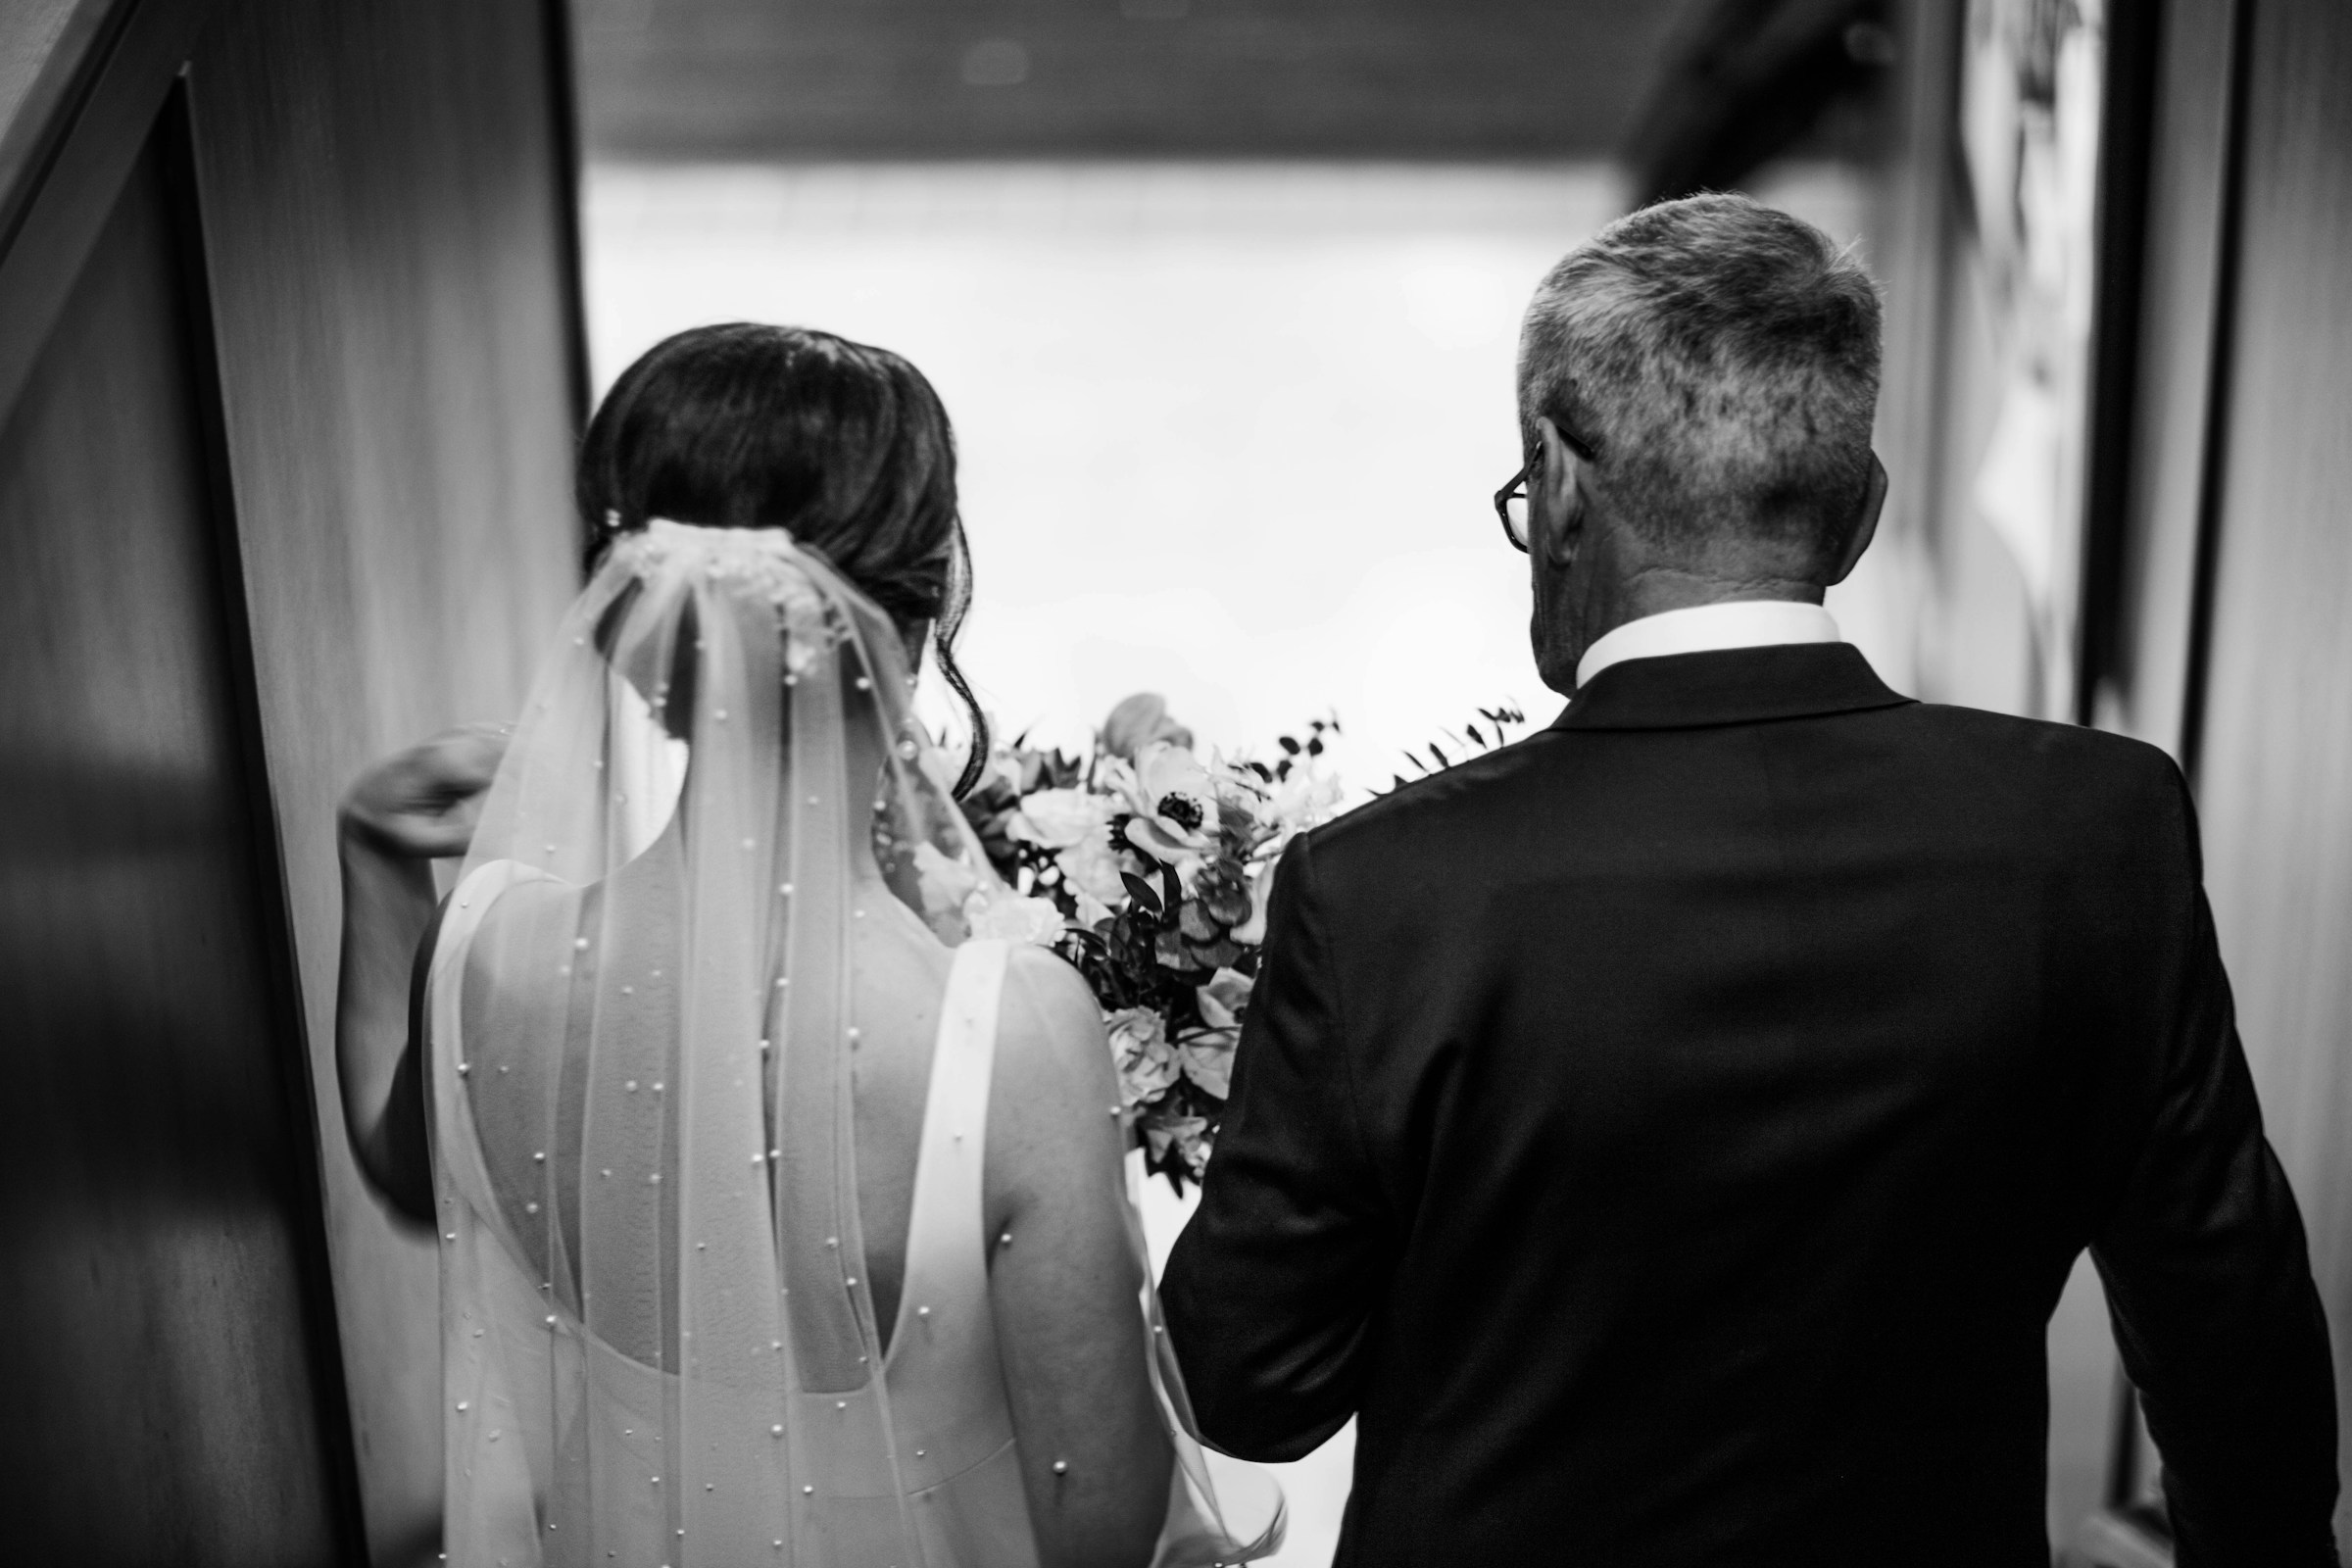 Bride and father | Source: Unsplash